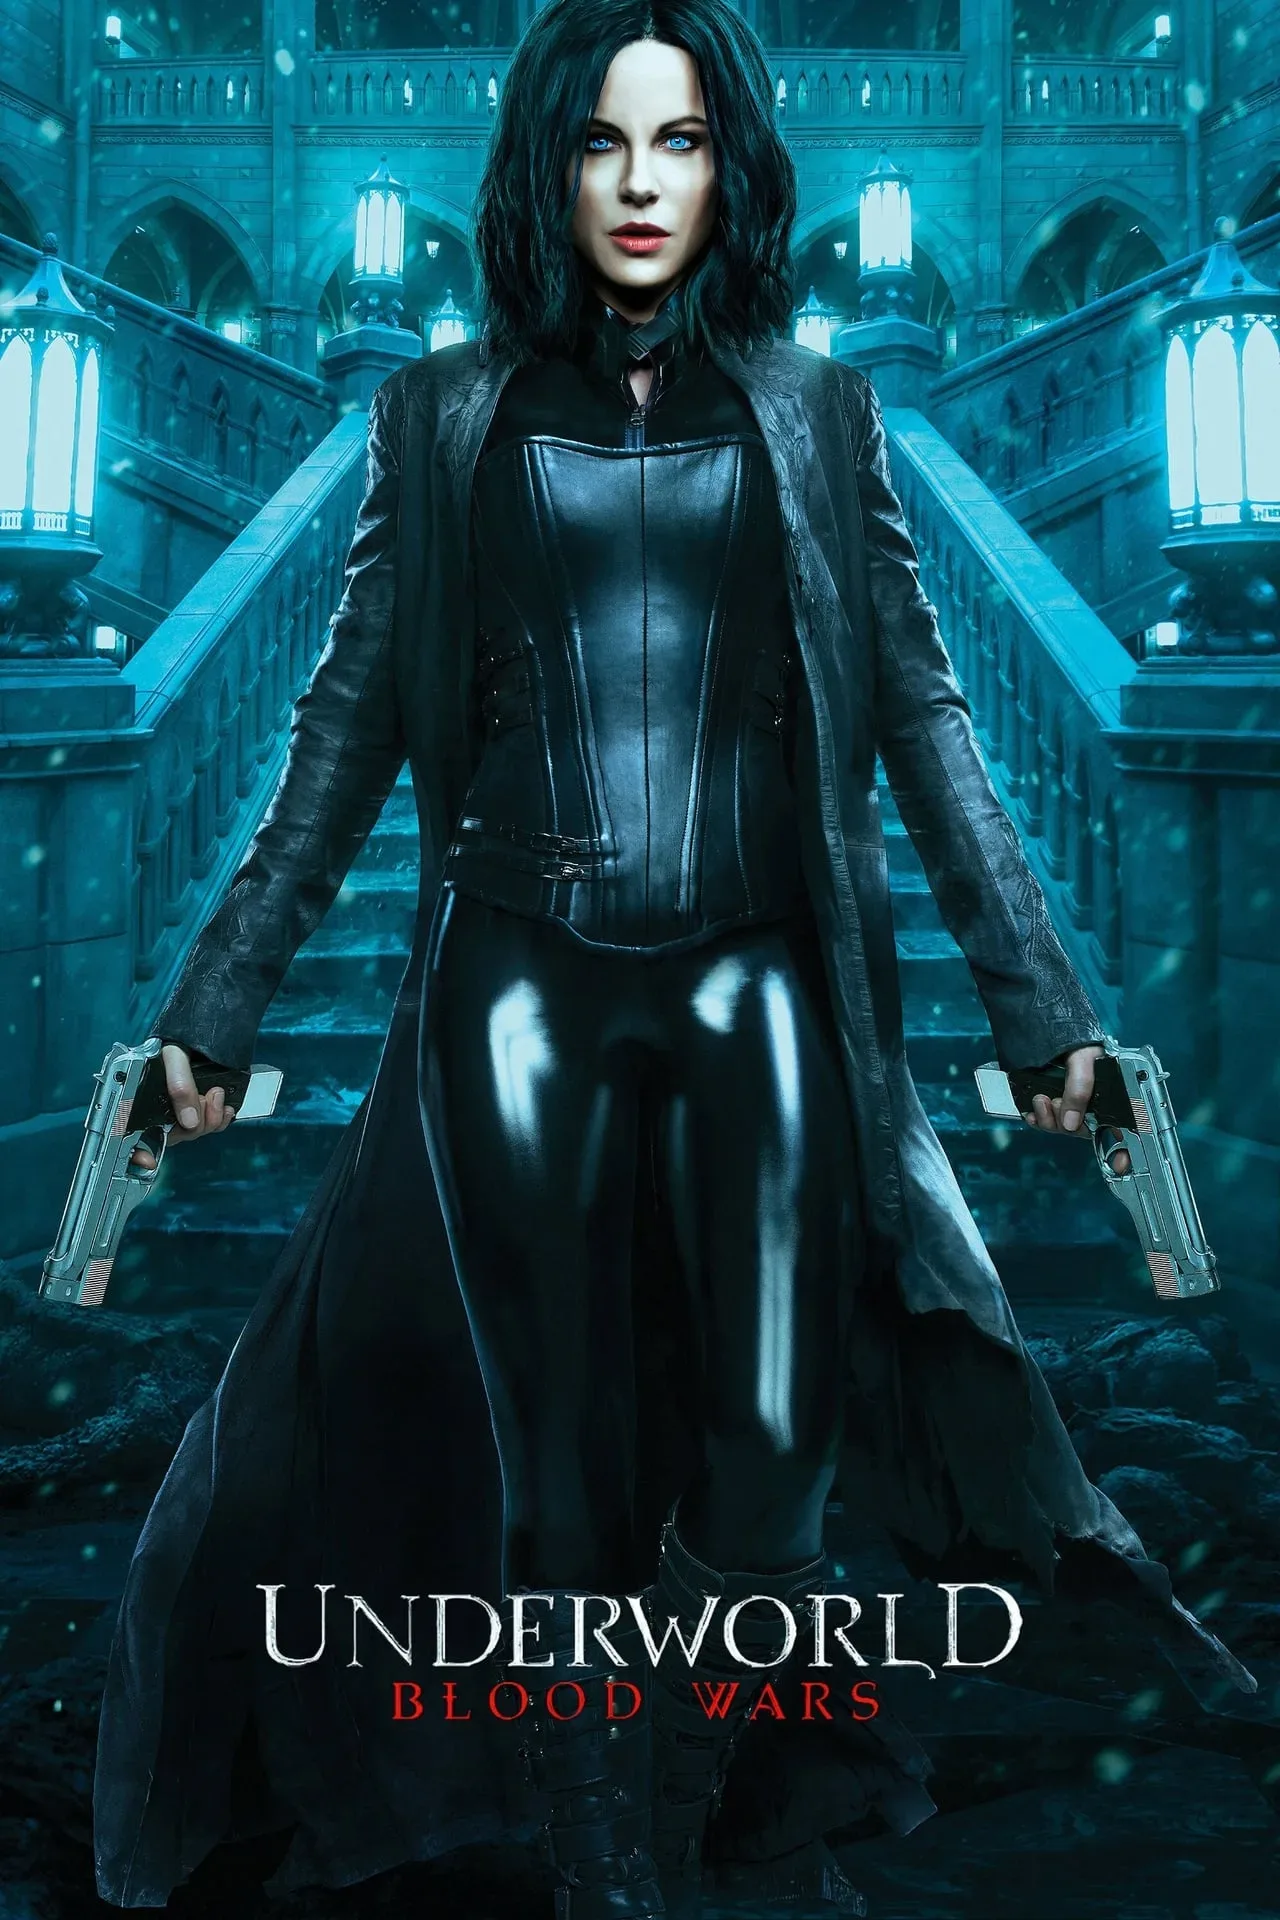 In the movie, Underworld: Blood Wars (2016) Selene decides to find a way to end the conflict between the Lycan clan and the Vampire faction, who are trying to hunt her down. She tries everything in her hand to save humanity.